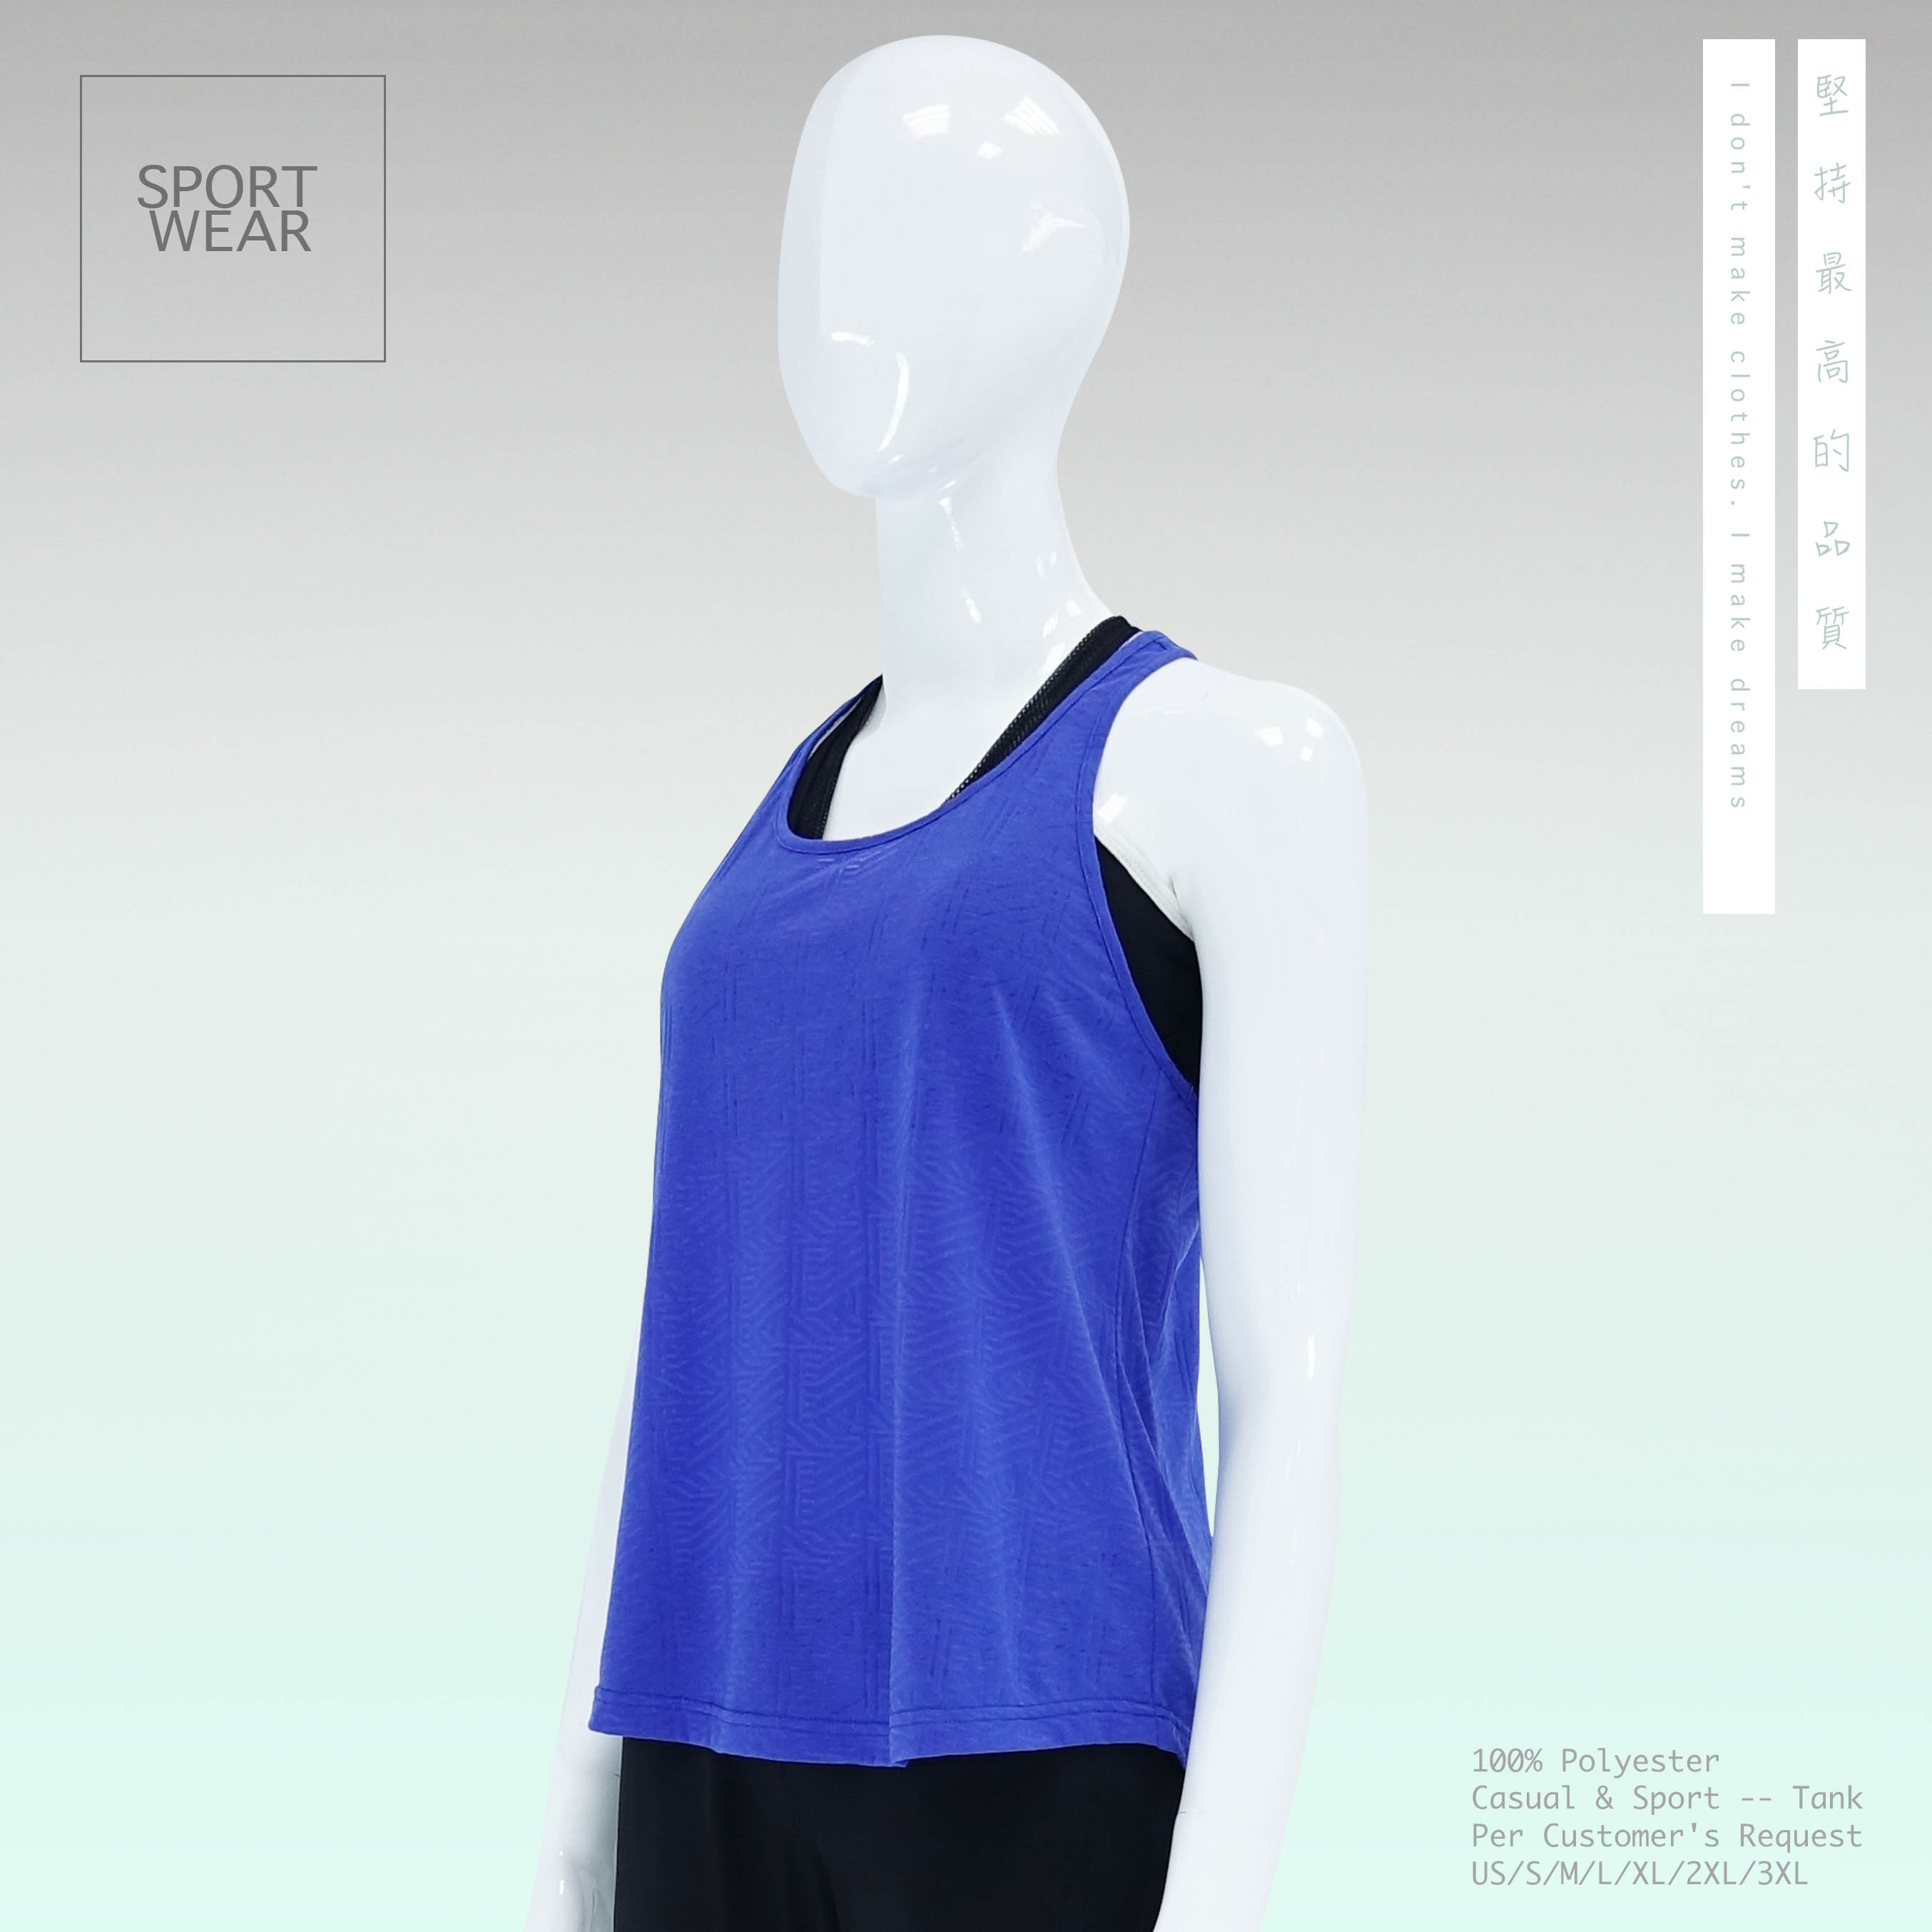 Lightweight Outer Burn-out Printing Fabric High Breathability Airflow Ventilation Yoga Tank Top